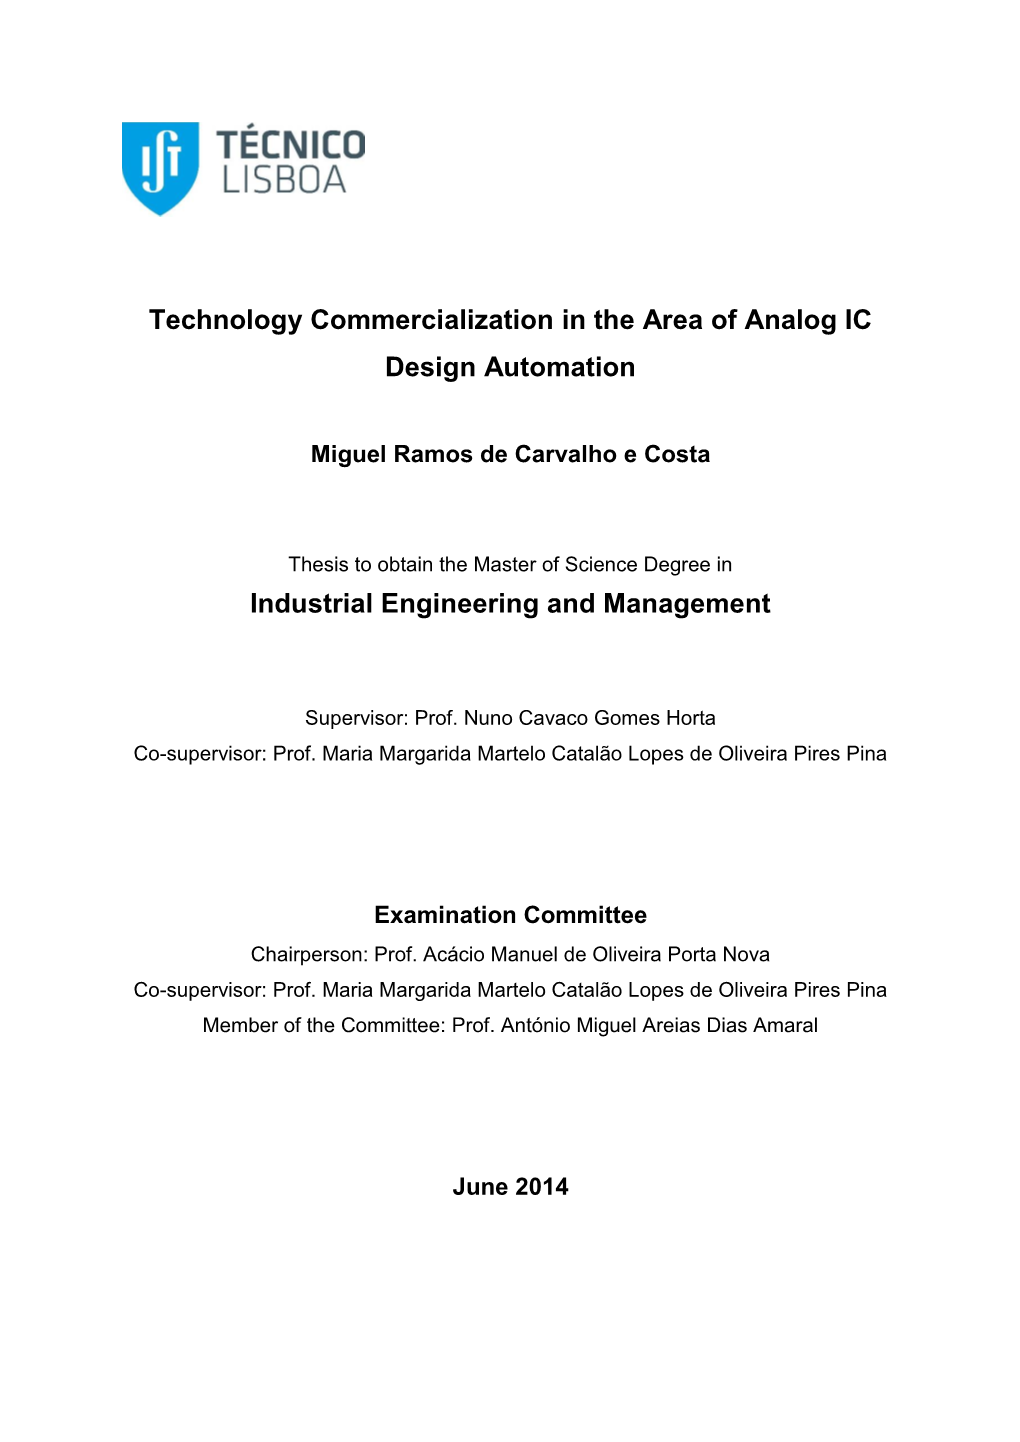 Technology Commercialization in the Area of Analog IC Design Automation